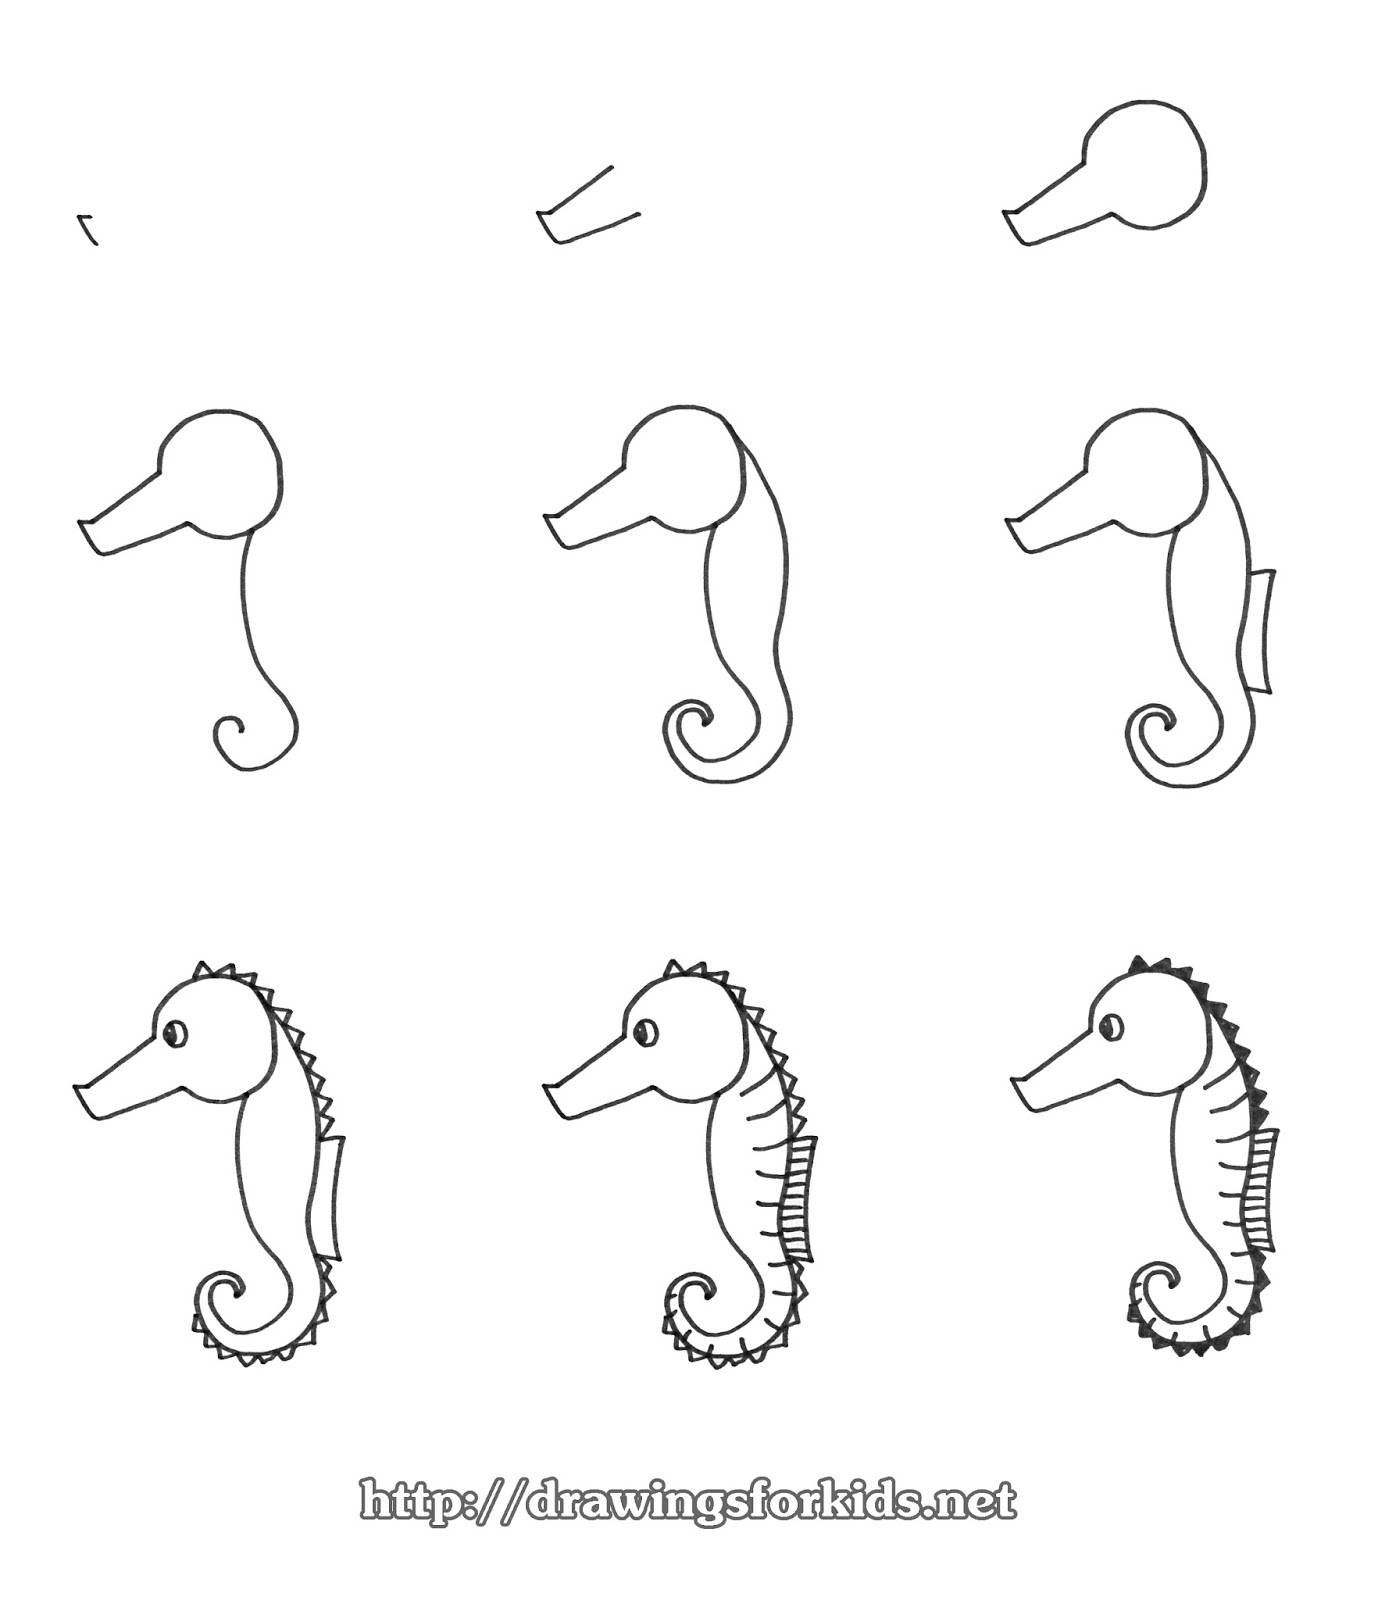 Seahorse Easy Drawing at GetDrawings.com | Free for ...